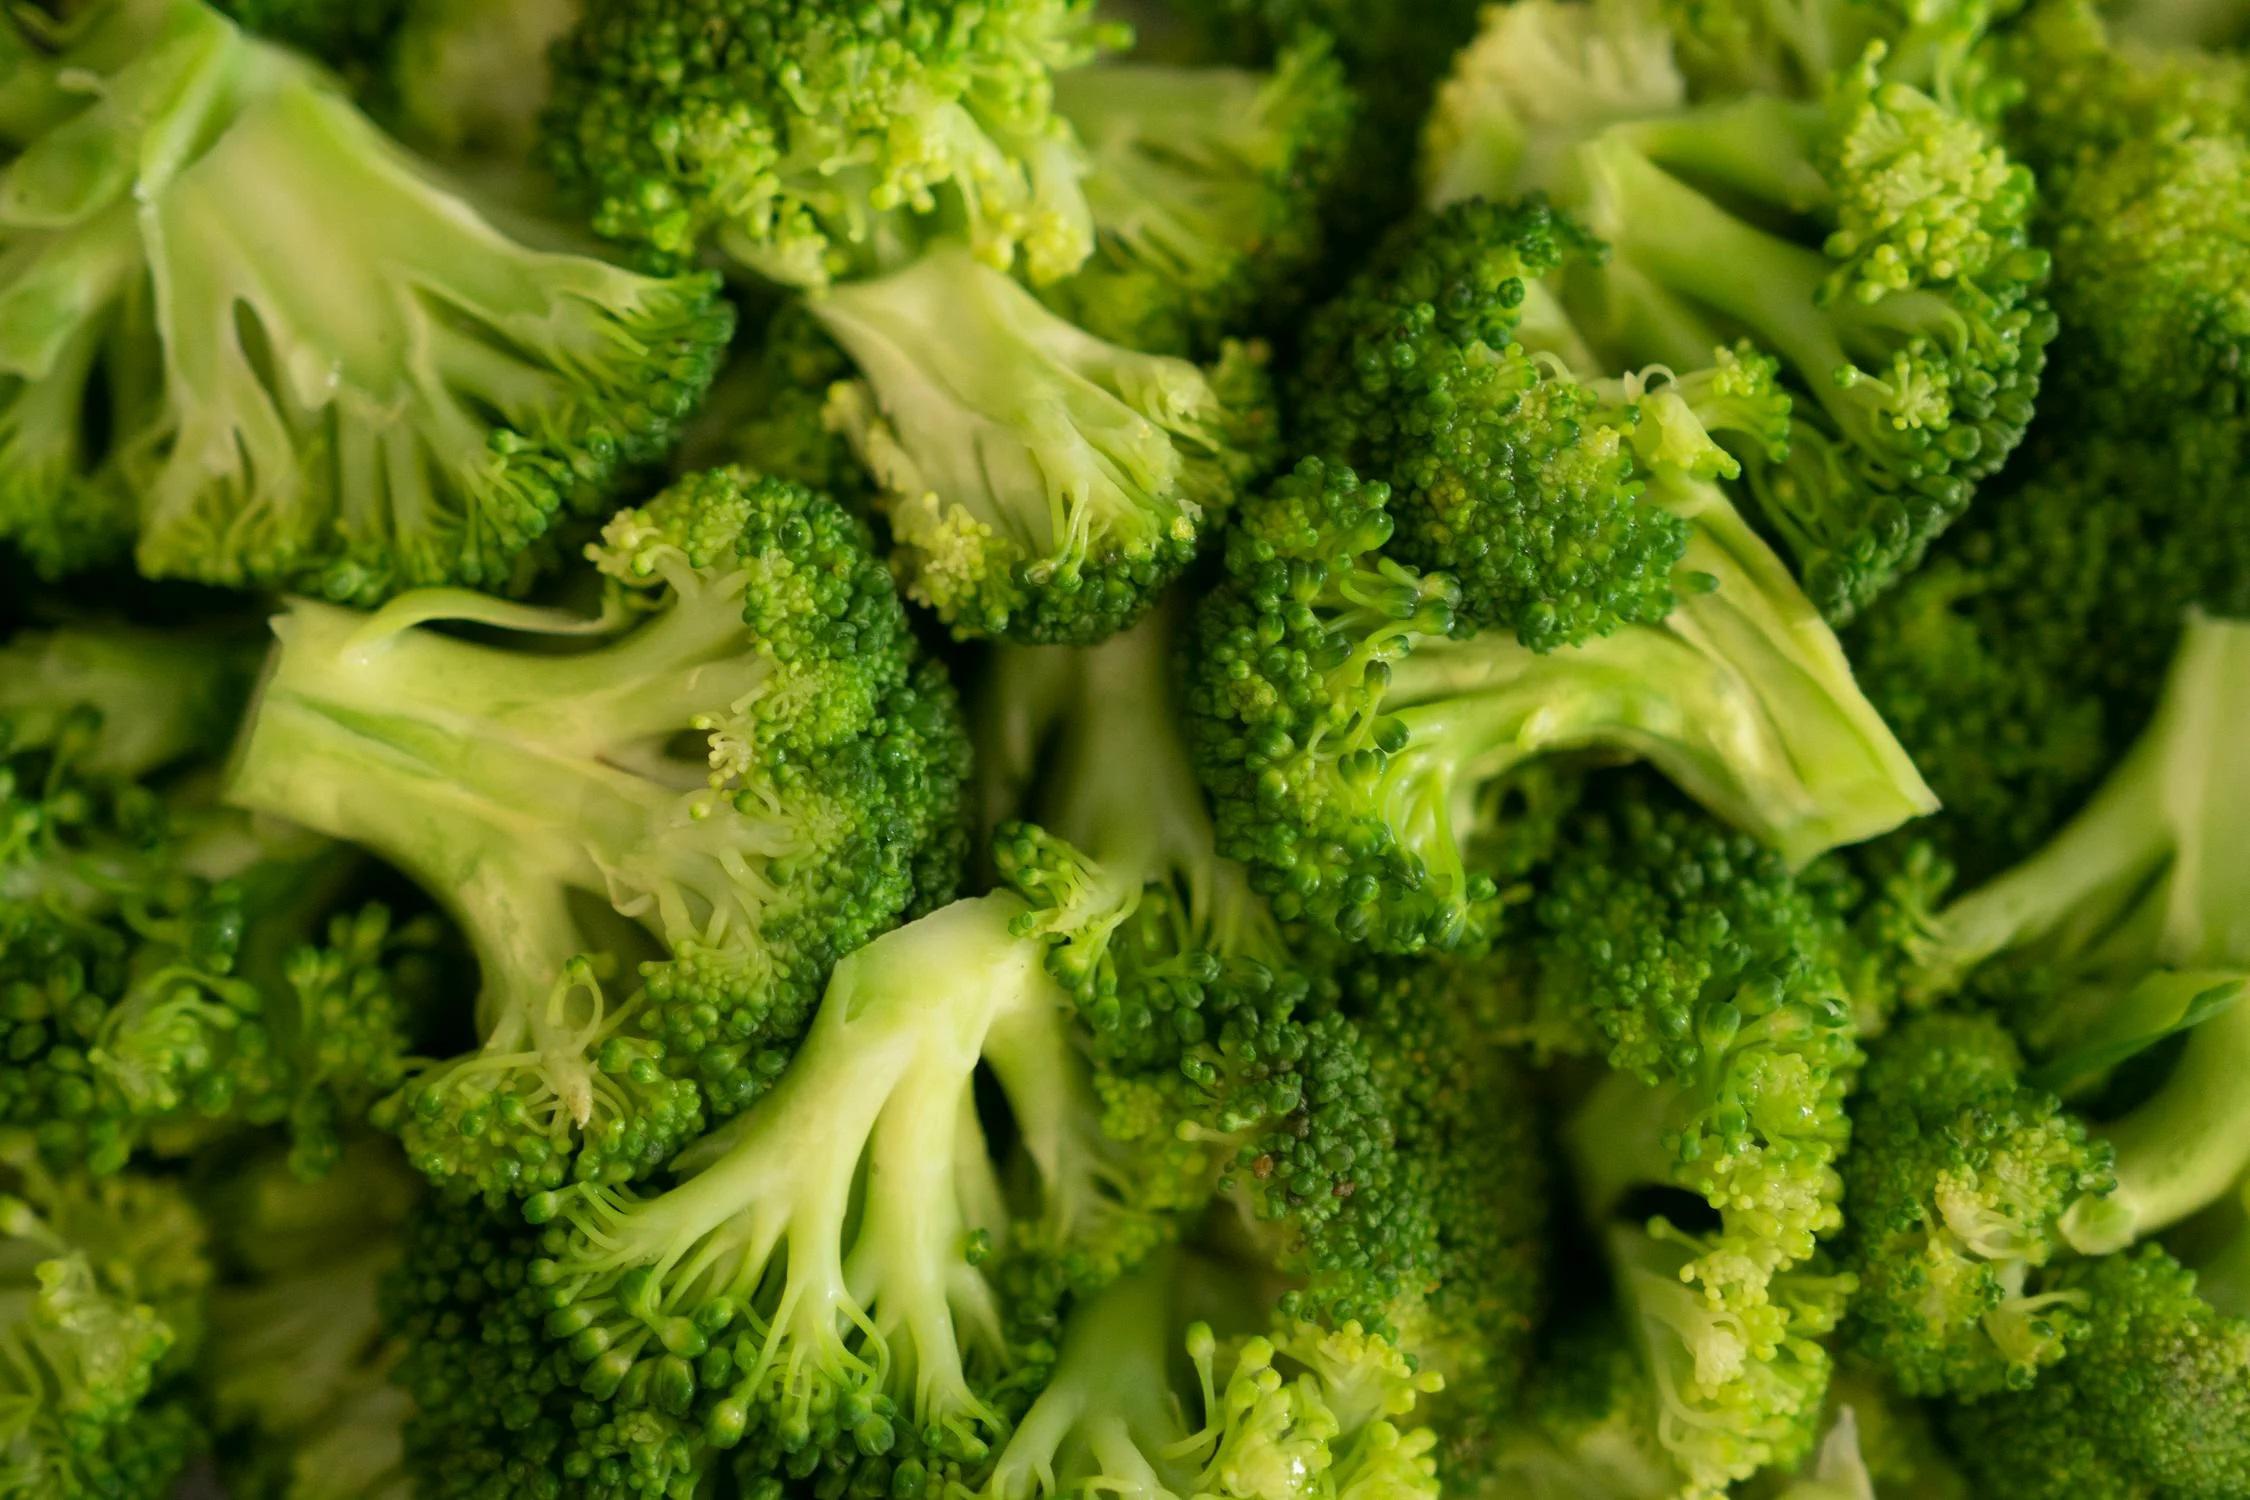 Magnesium in broccoli helps expand and strengthen the walls of blood vessels